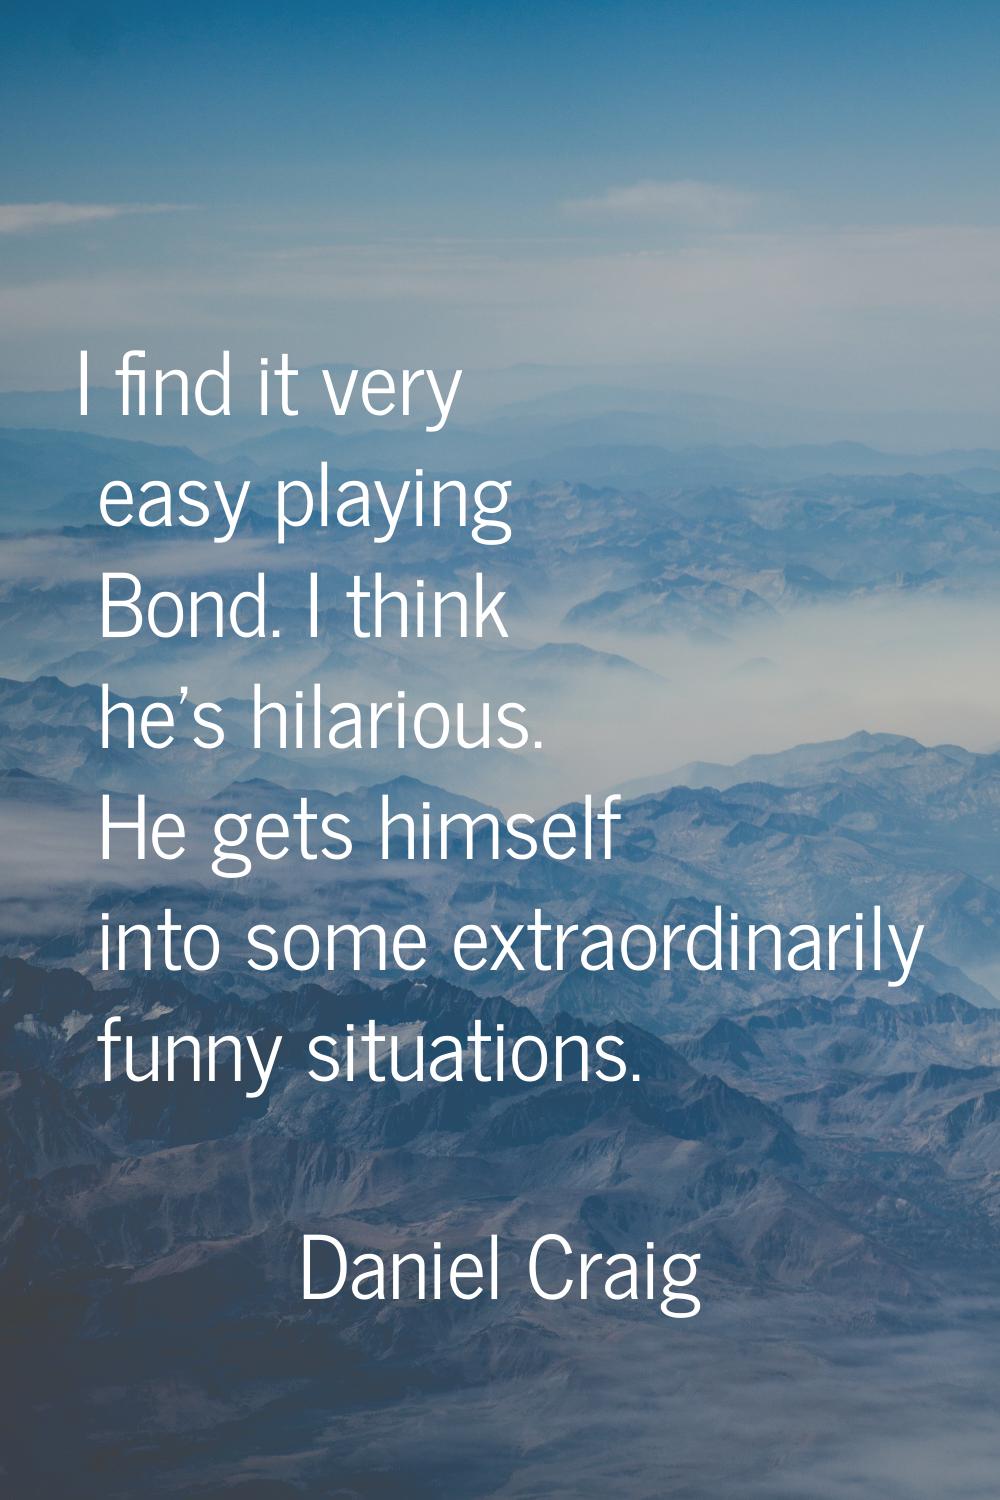 I find it very easy playing Bond. I think he's hilarious. He gets himself into some extraordinarily